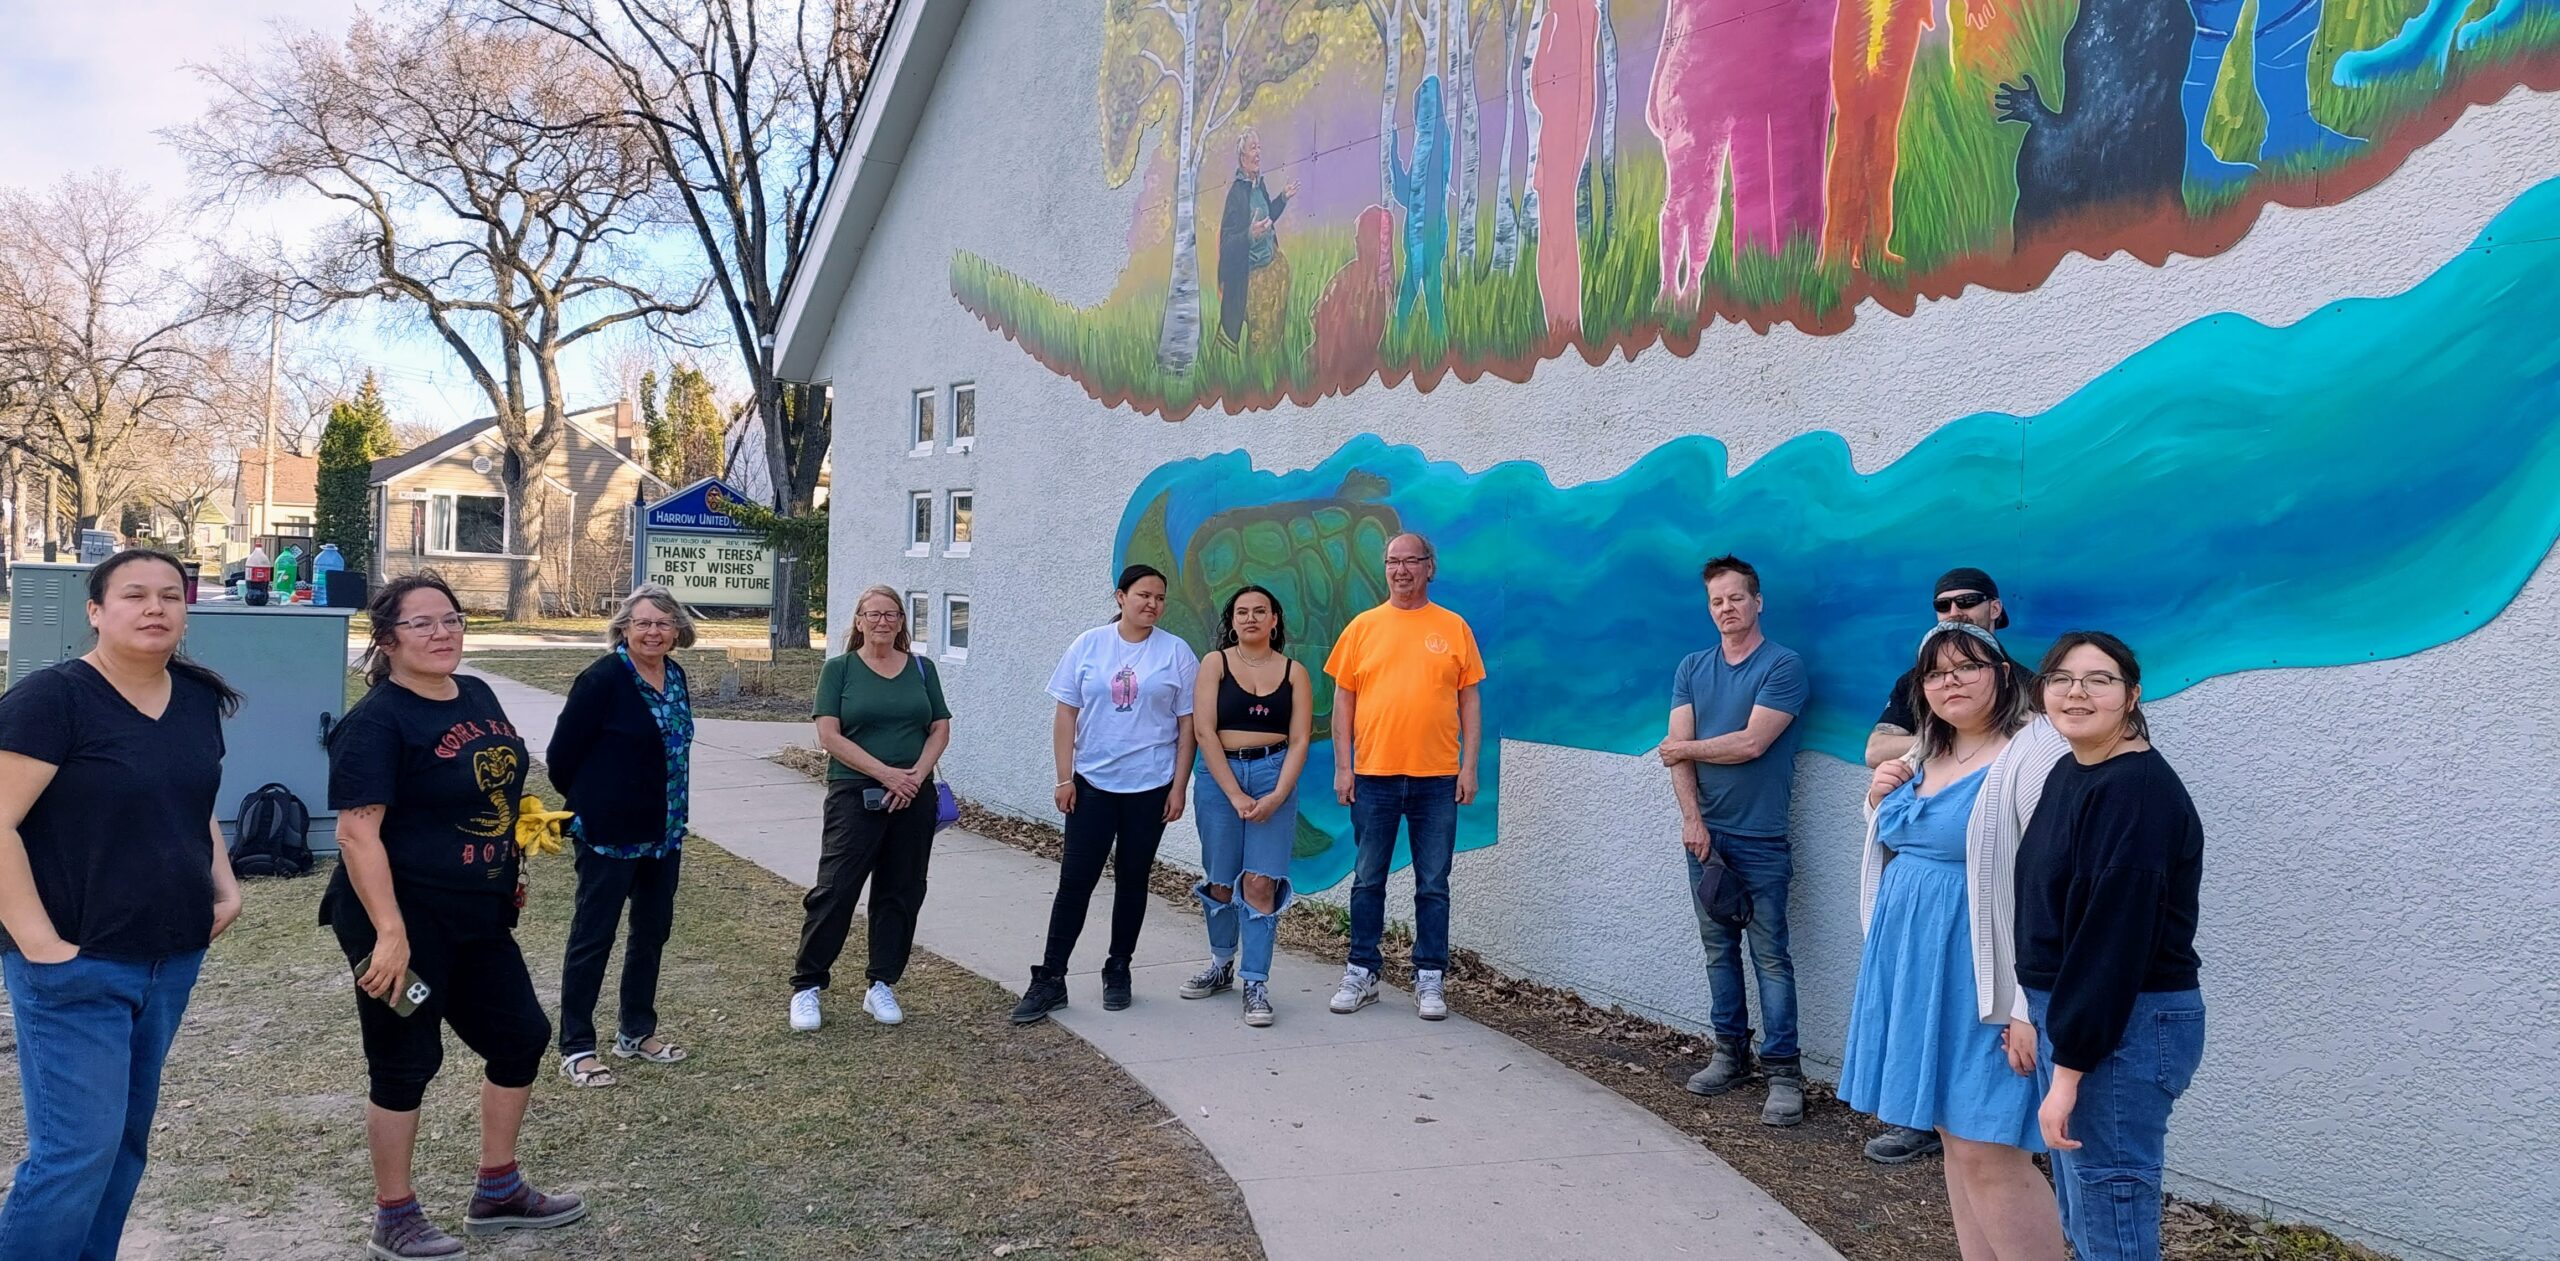 Group of youth and adults in circle in front of completed mural